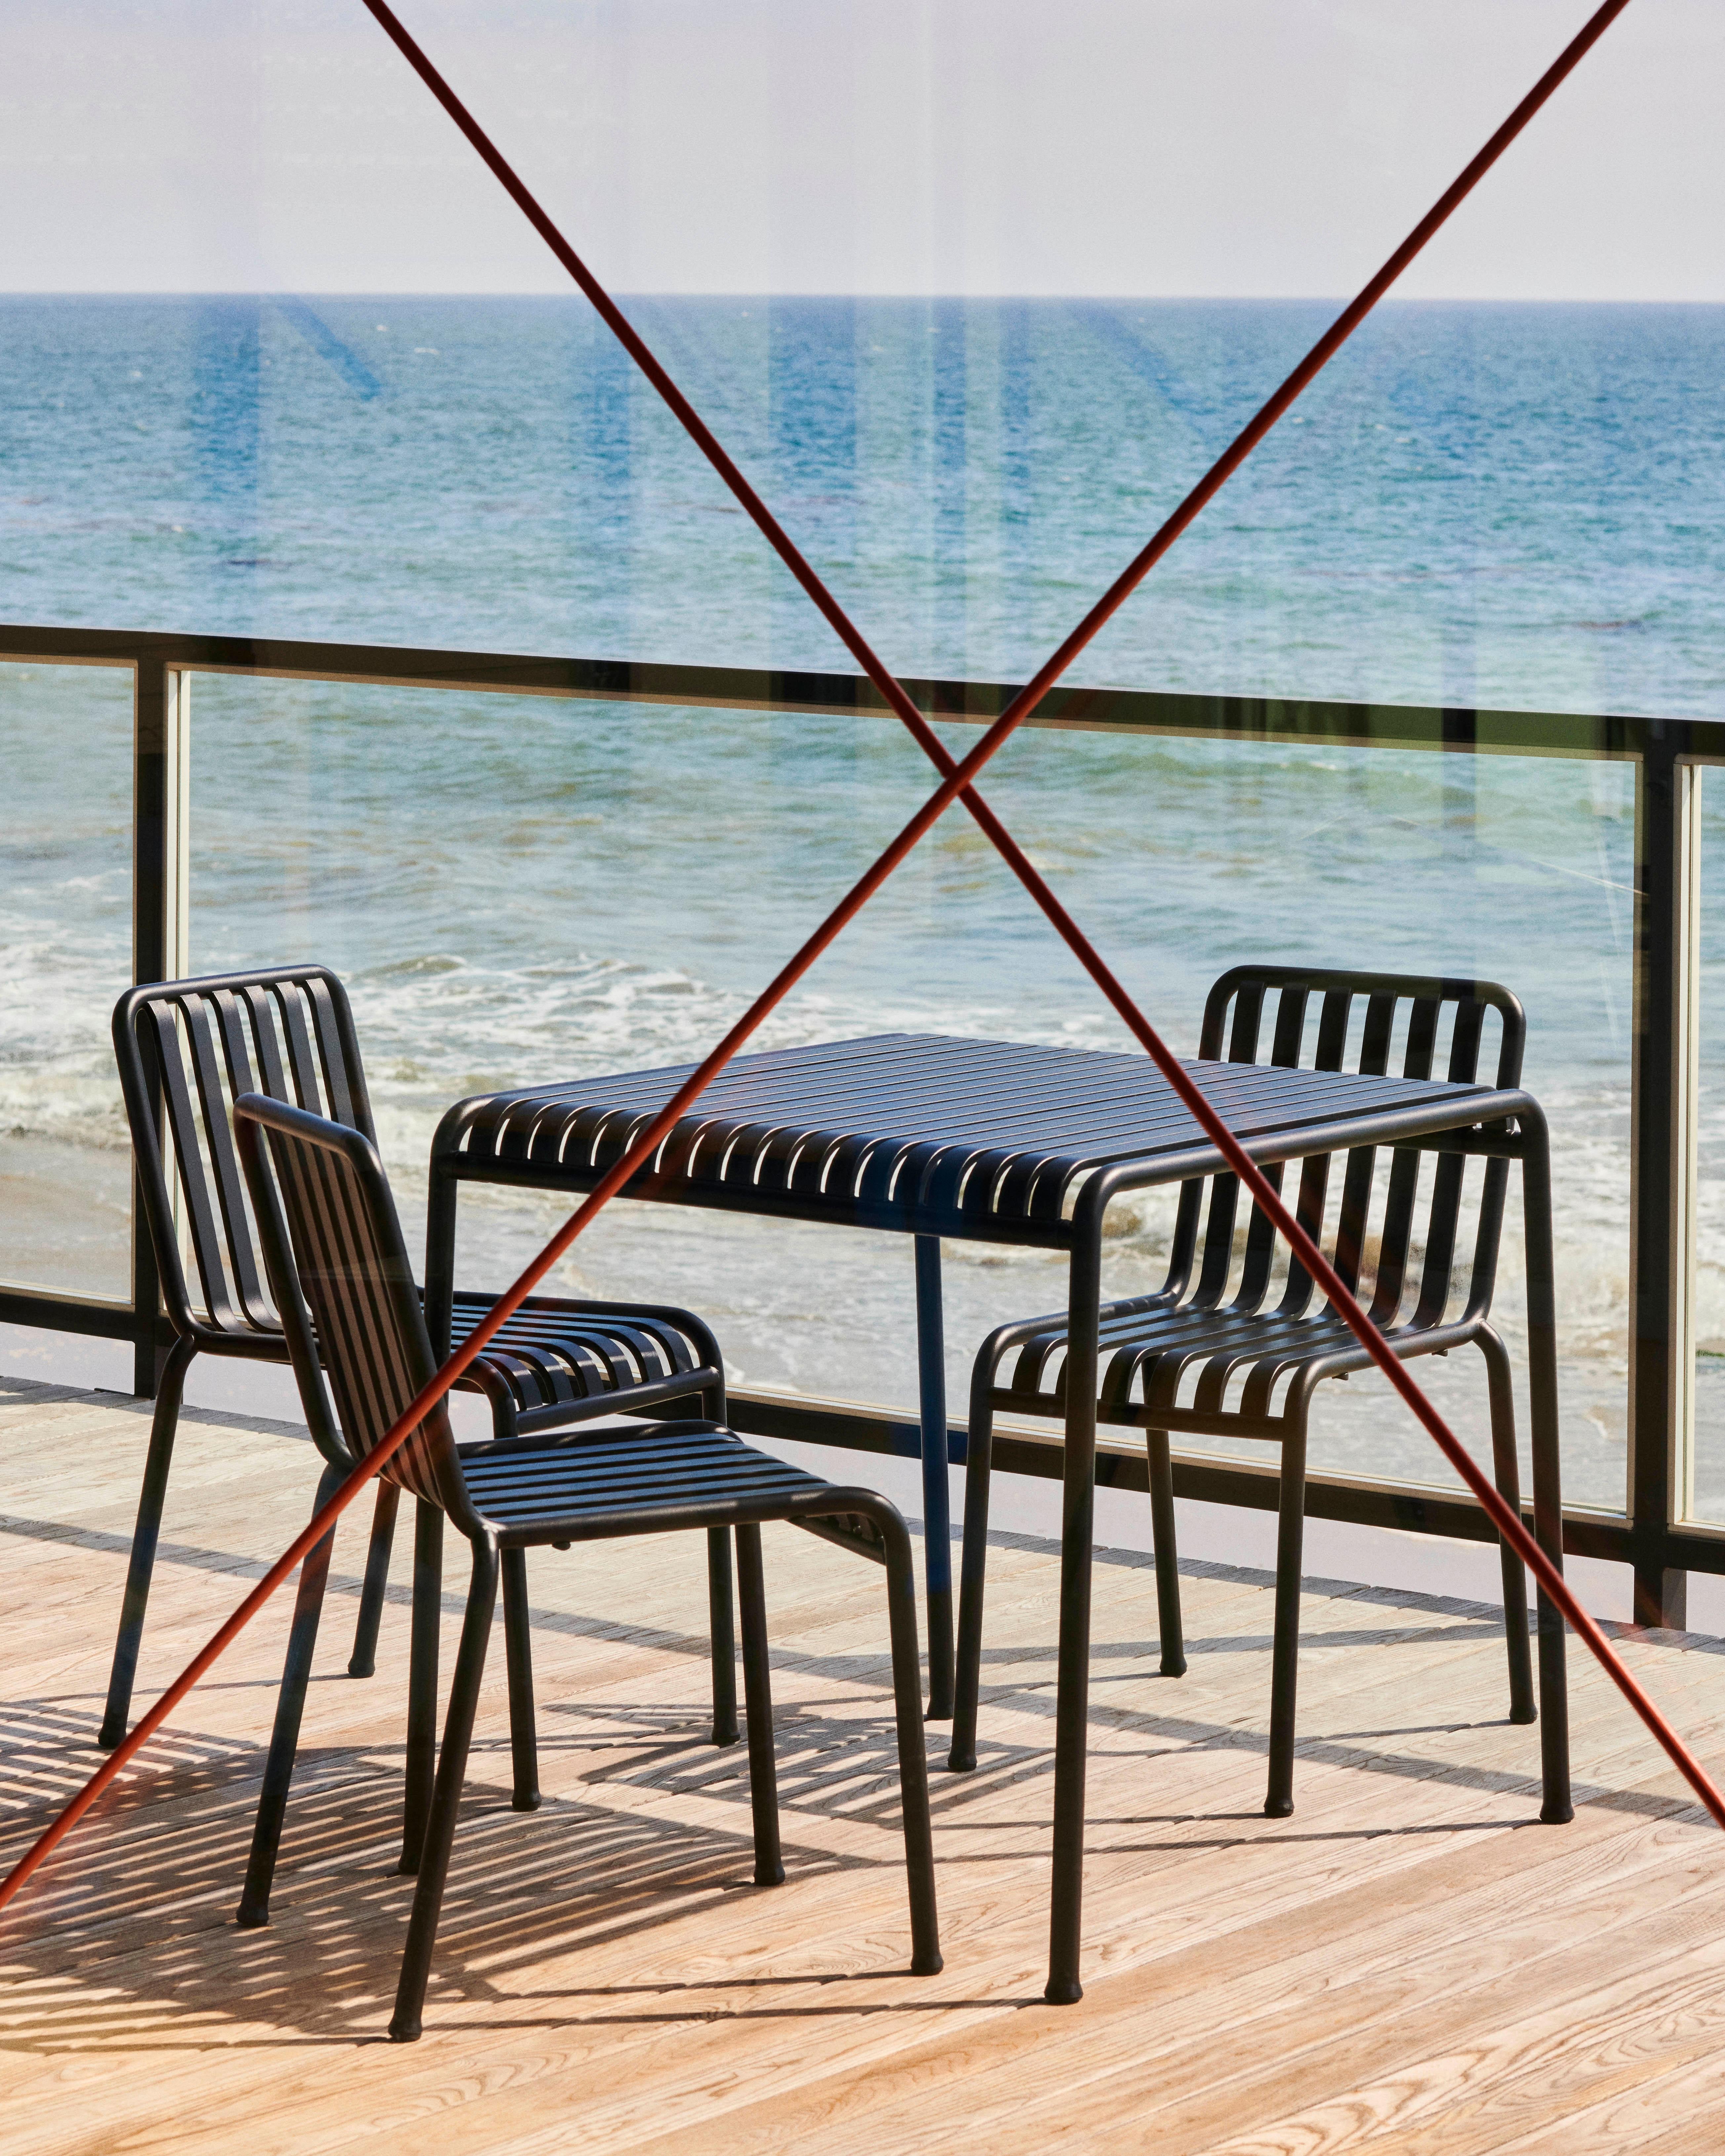 Designed by French brothers Ronan and Erwan Bouroullec, Palissade is a collection of outdoor furniture for HAY in powder coated or hot galvanized steel.
United by a common principle of symmetrical geometry, the Palissade collection is engineered to